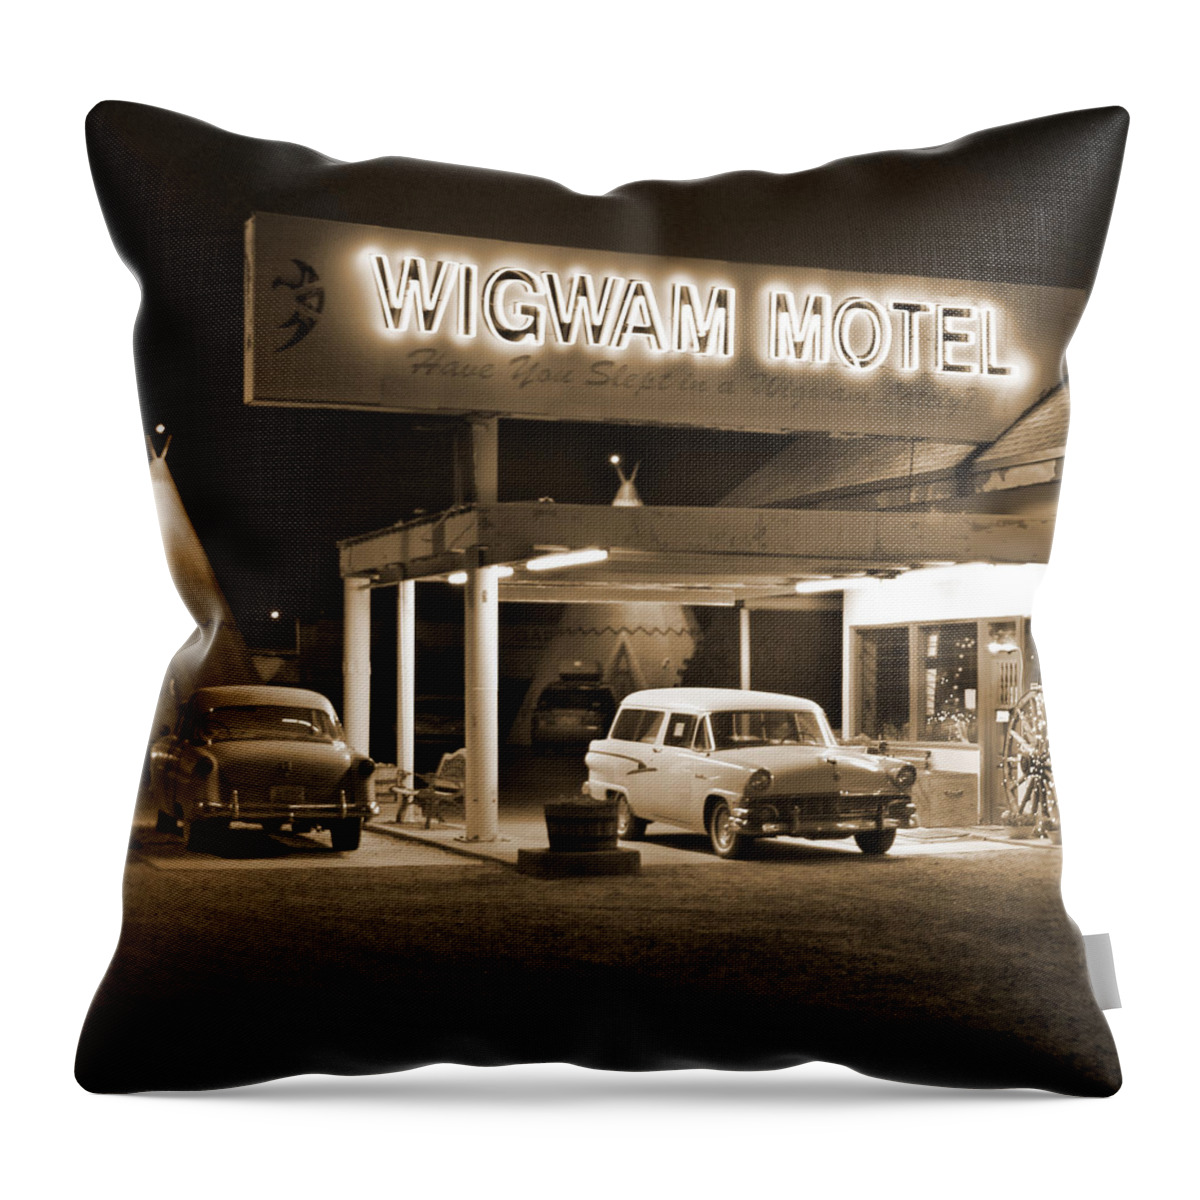 Tee Pee Throw Pillow featuring the photograph Route 66 - Wigwam Motel by Mike McGlothlen